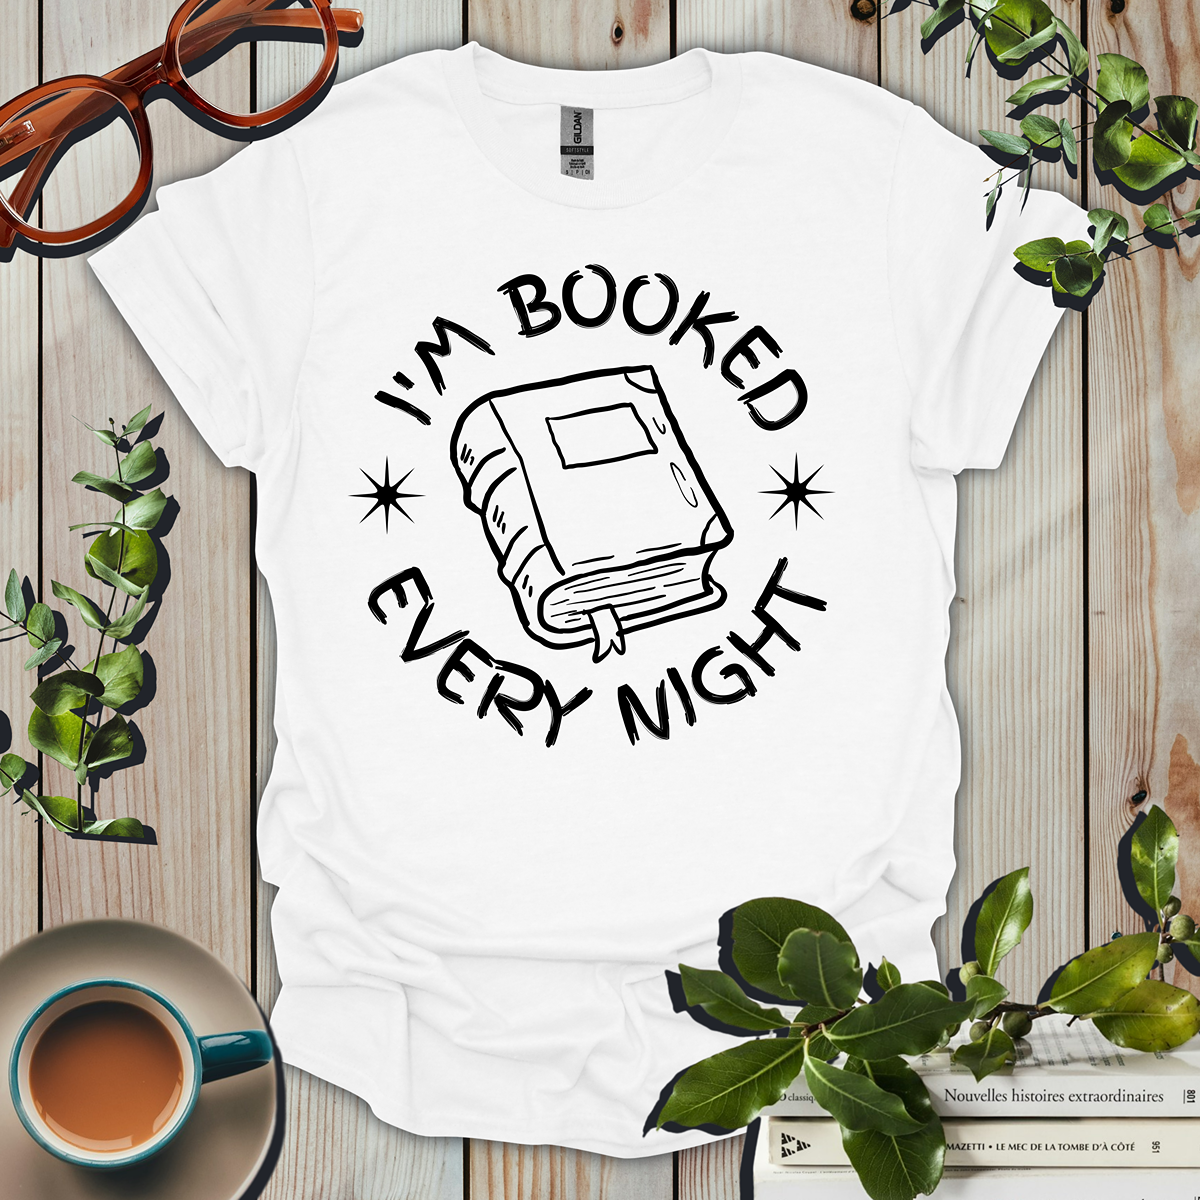 I'm Booked Every Night T-Shirt